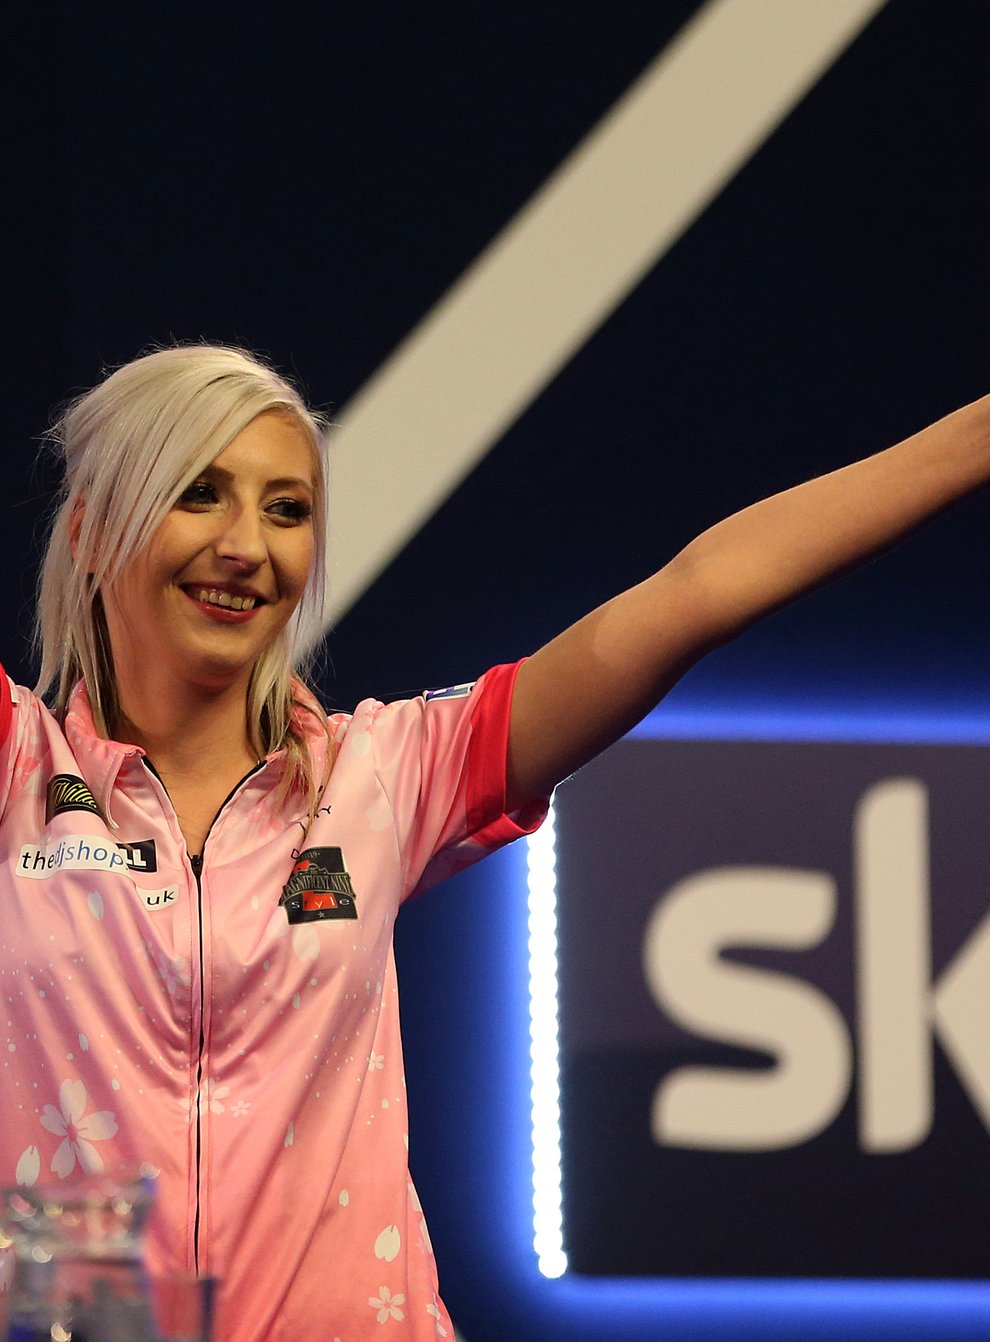 Sherrock became the first woman to win a match at the PDC World Darts Championship last year